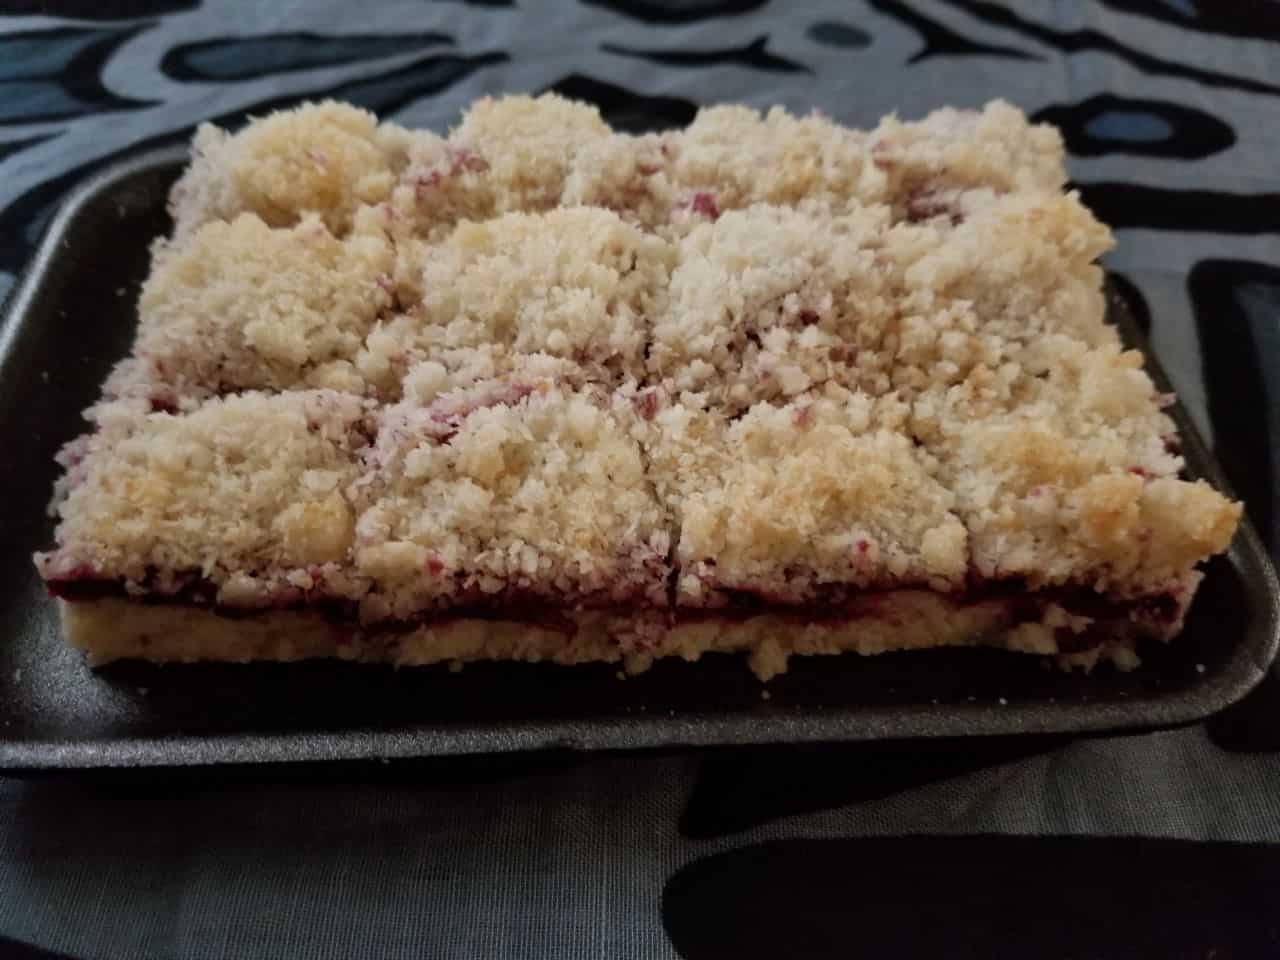 Canadian Foods from Atlantic Canada - Partridgeberry Squares, Newfoundland